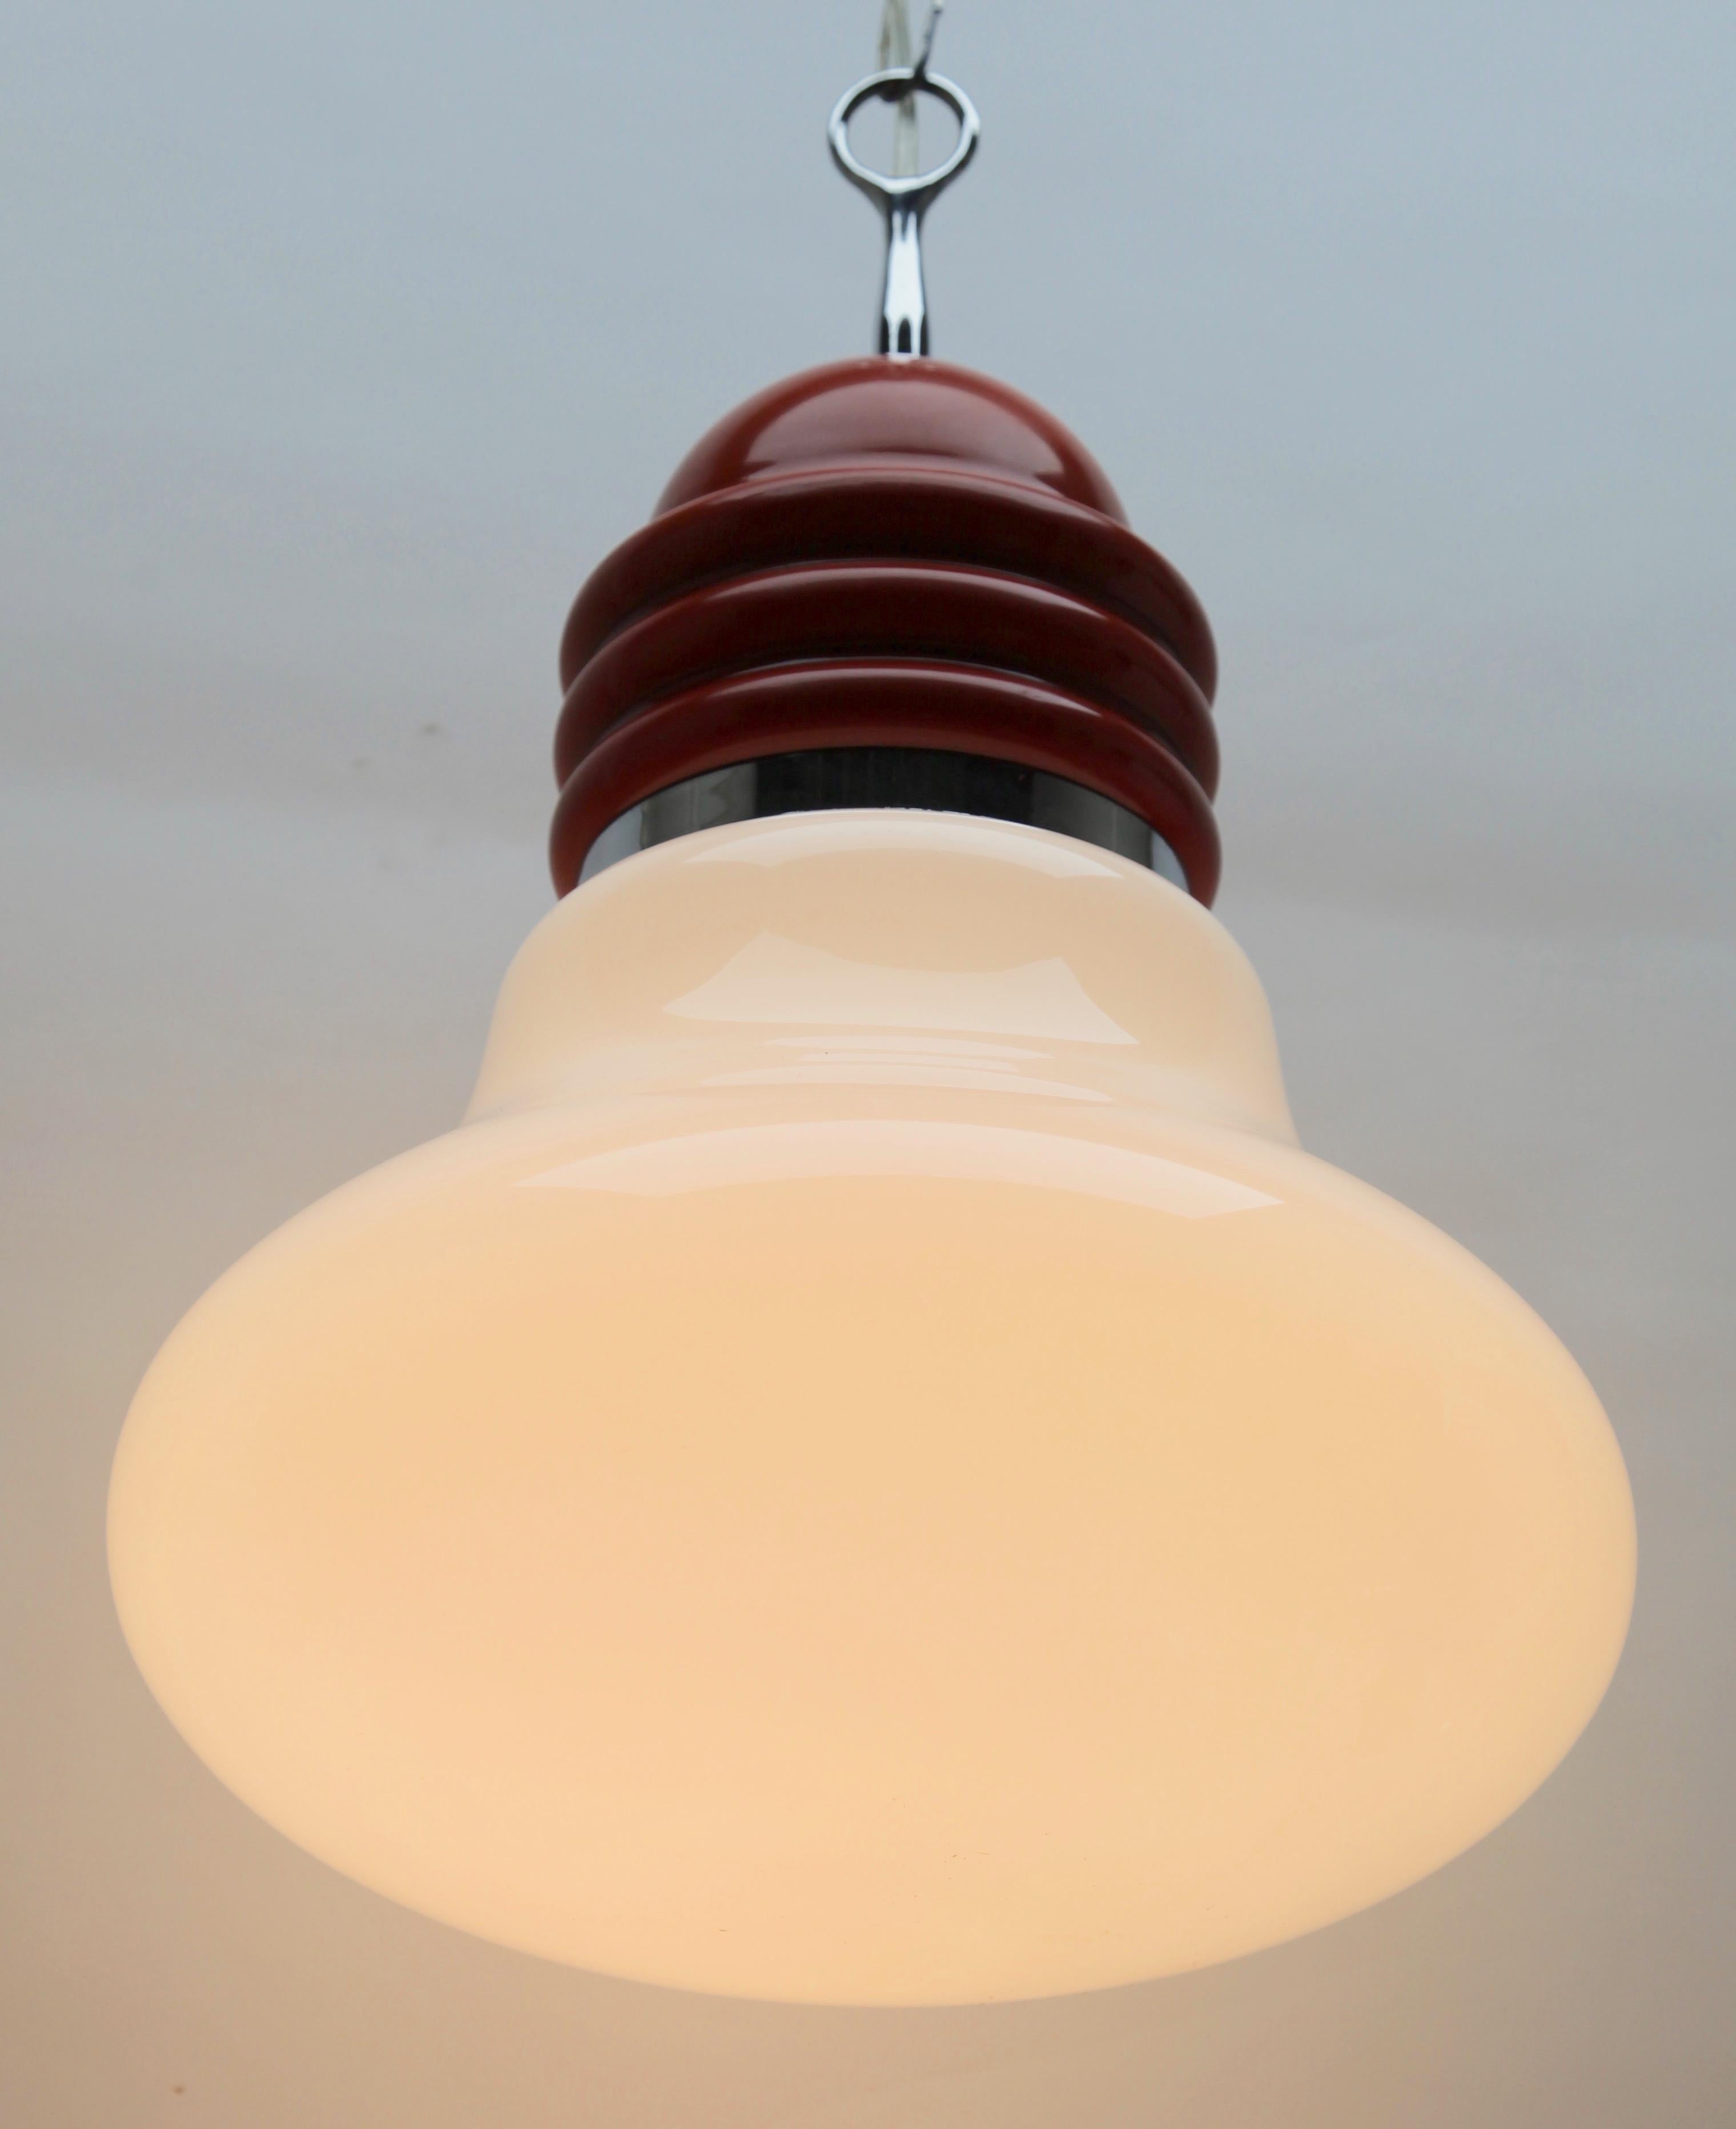 Vintage Pendant Ceiling Light in the Schape of a Big Bulb, Opaque Glass, 1960s For Sale 1